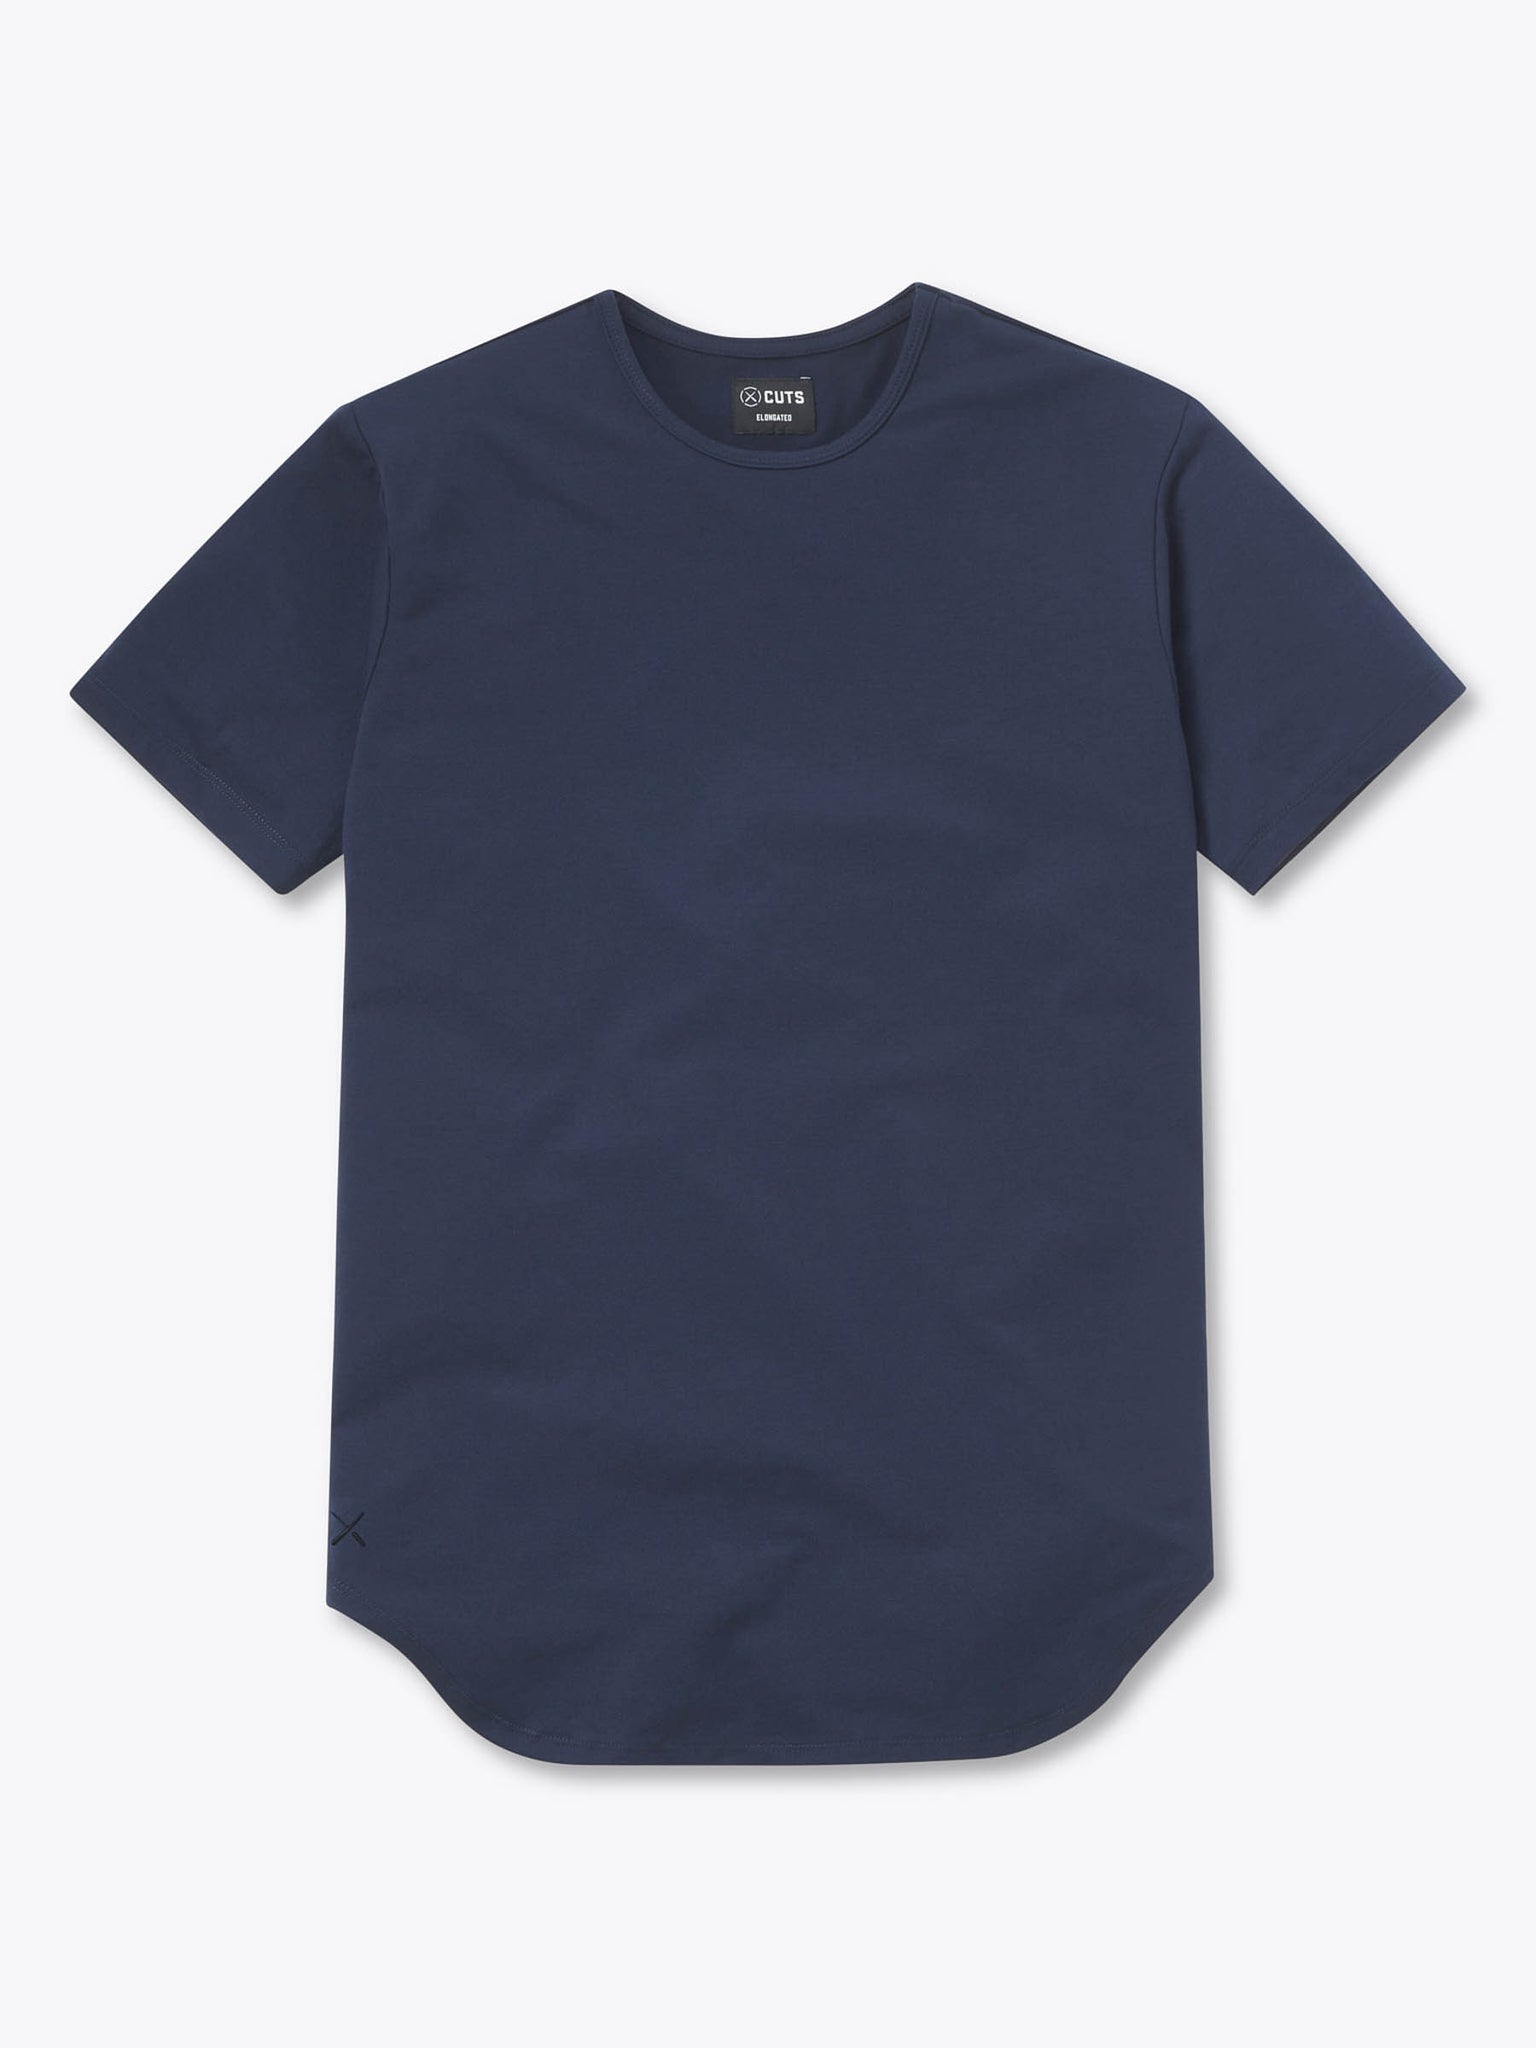 Signature-fit Tee Pro® Elongated | AO PYCA Blue Pacific